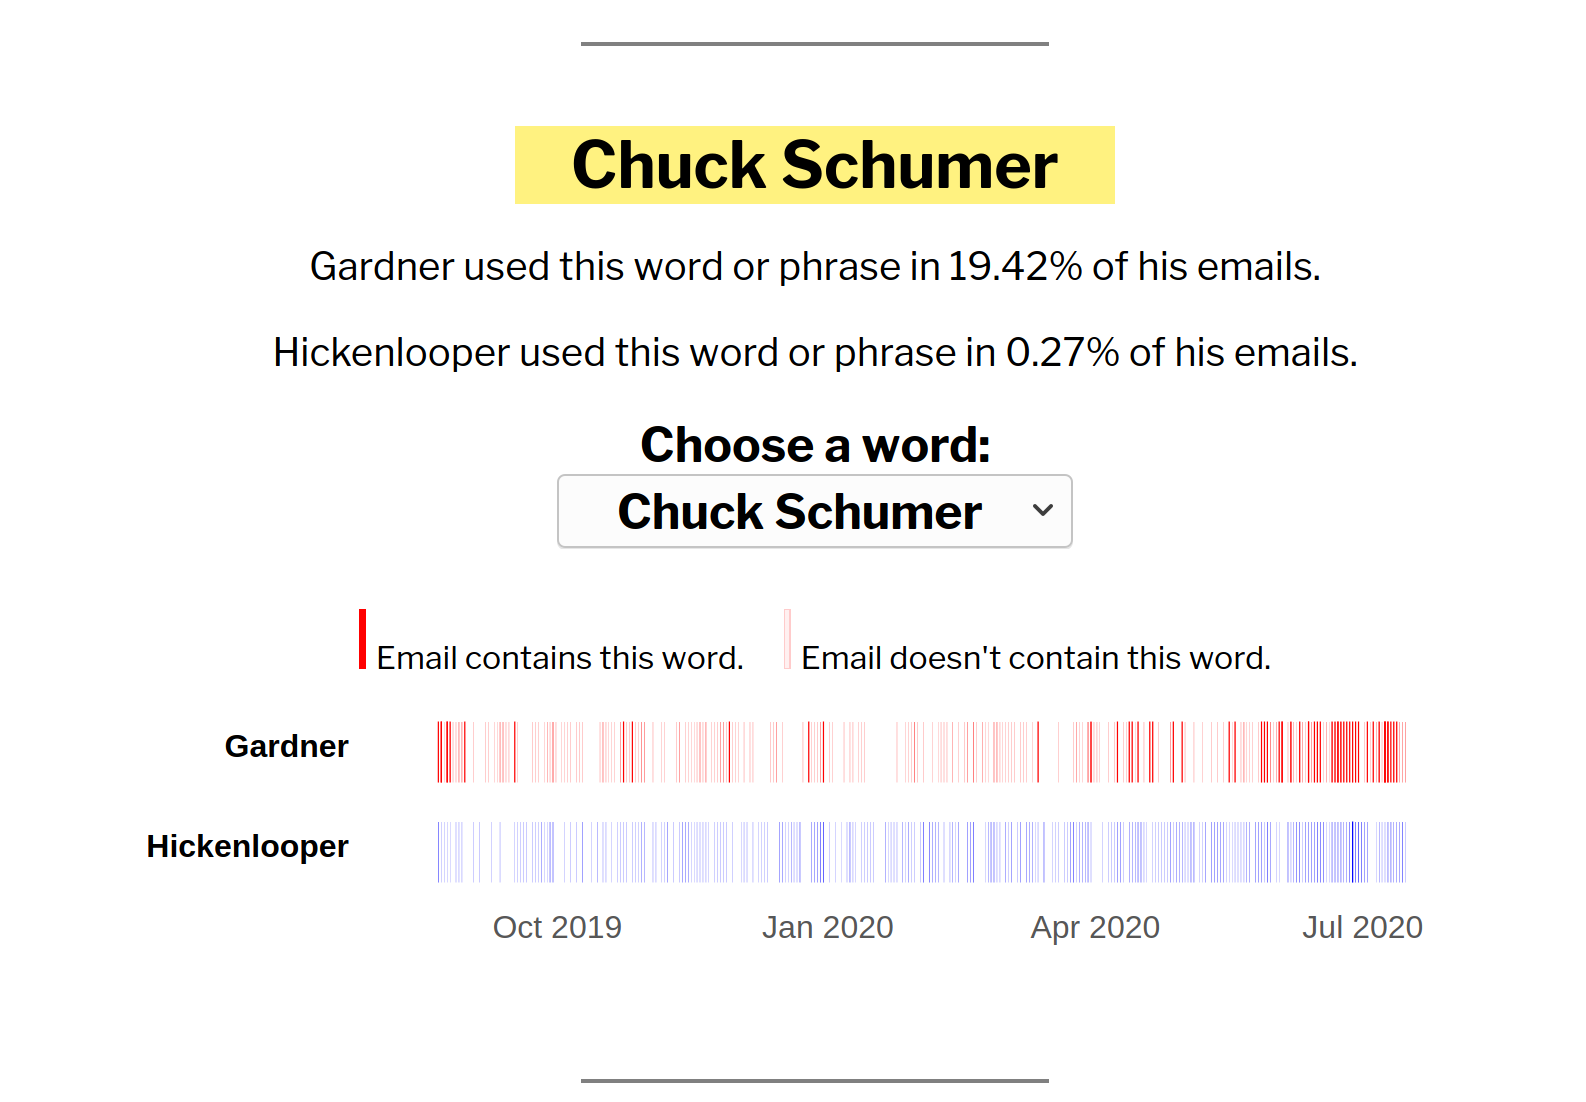 Graphic showing the percentage of times Hickenlooper and Gardner used the word 'Chuck Schumer'